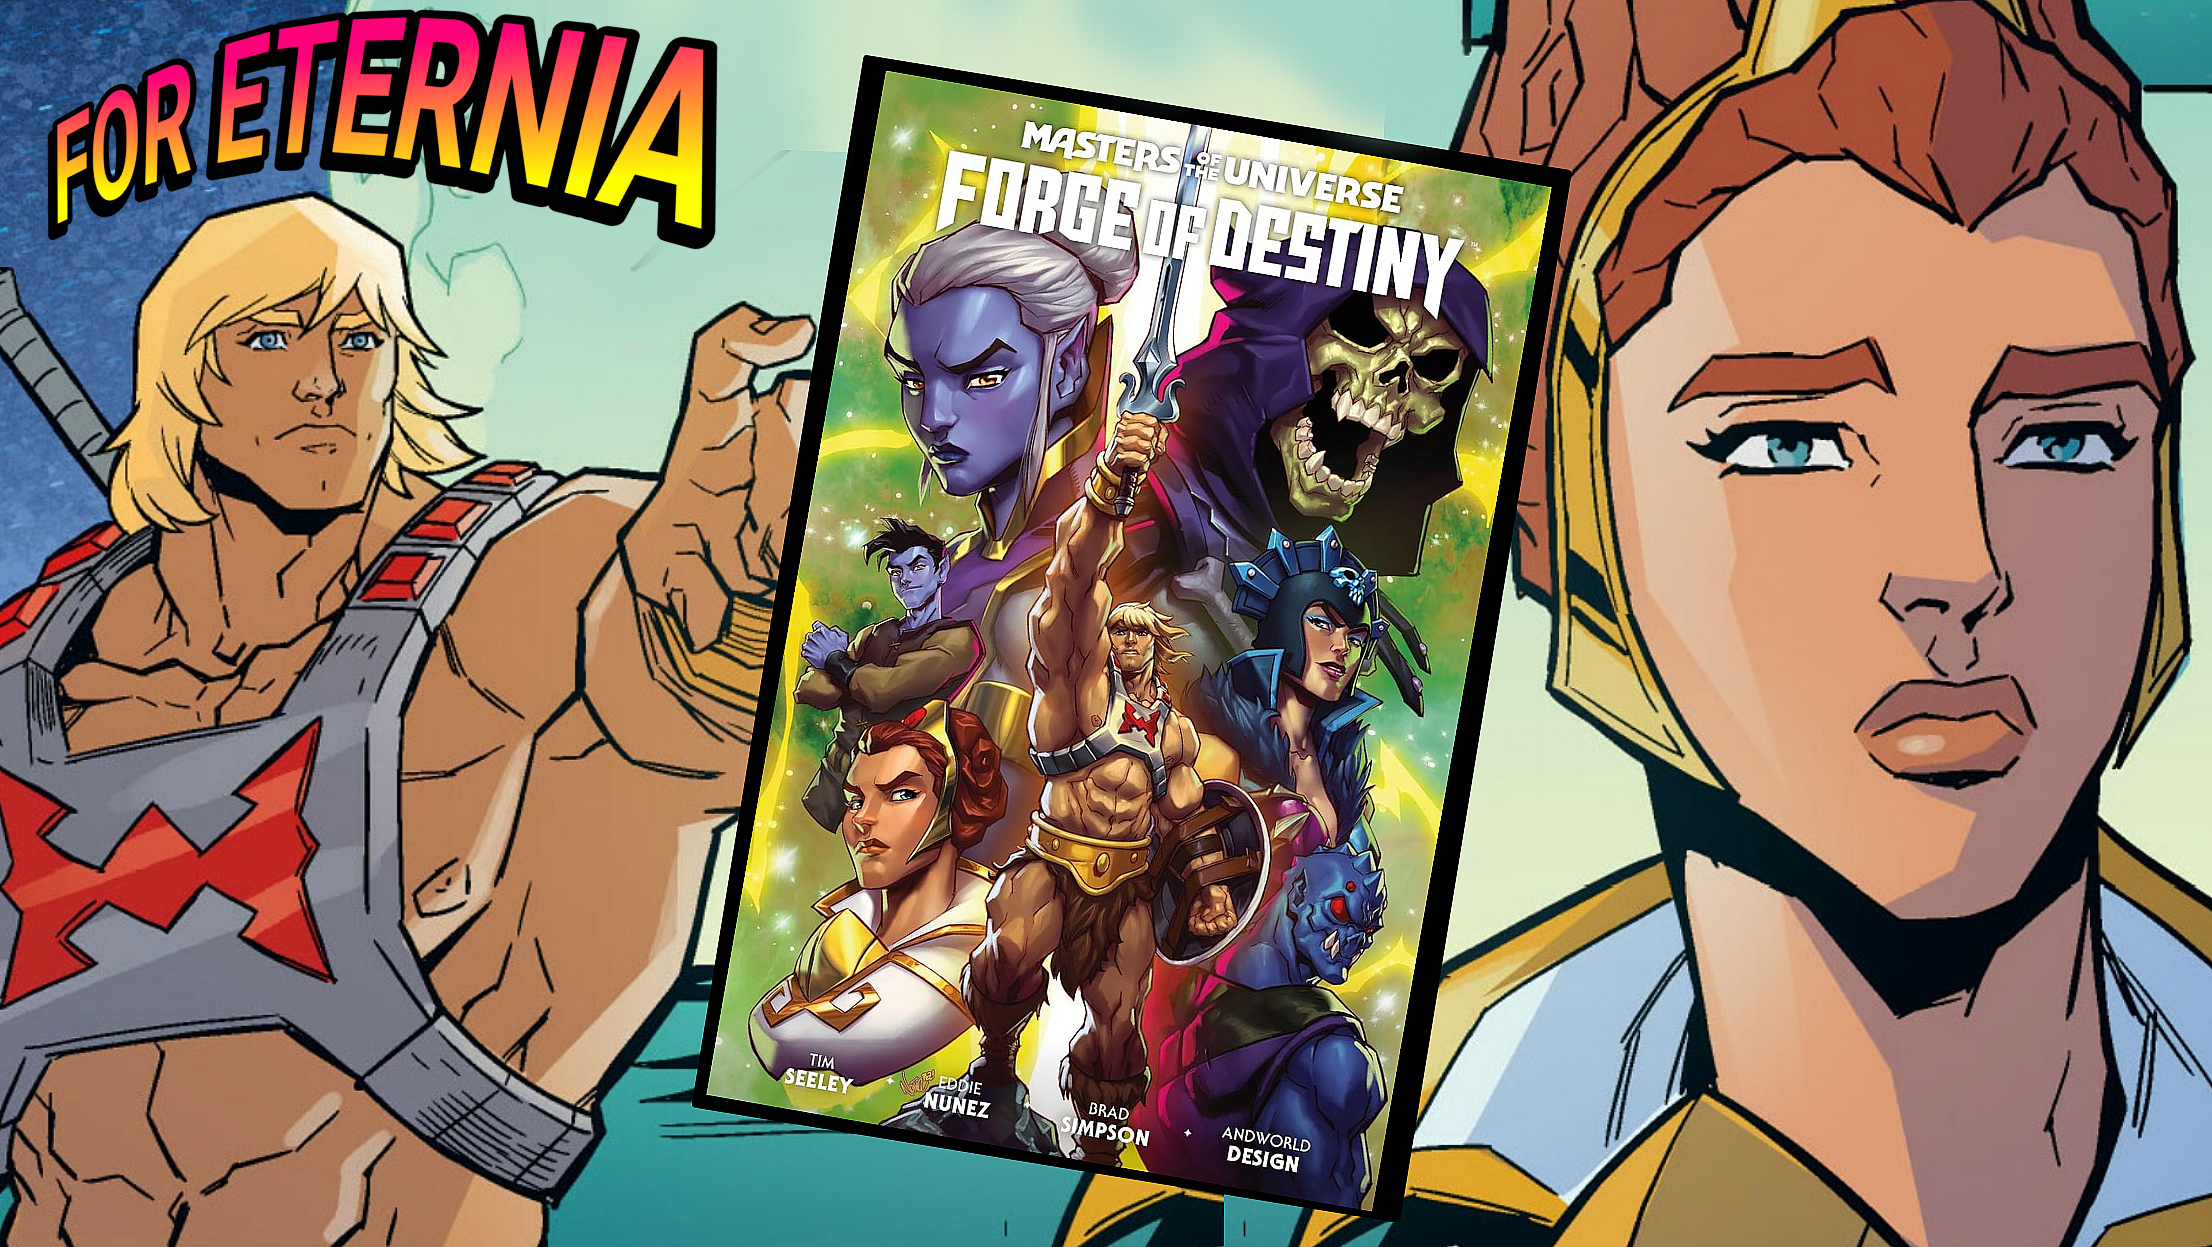 ”Masters of the Universe: Forge of Destiny” trade paperback is out today!